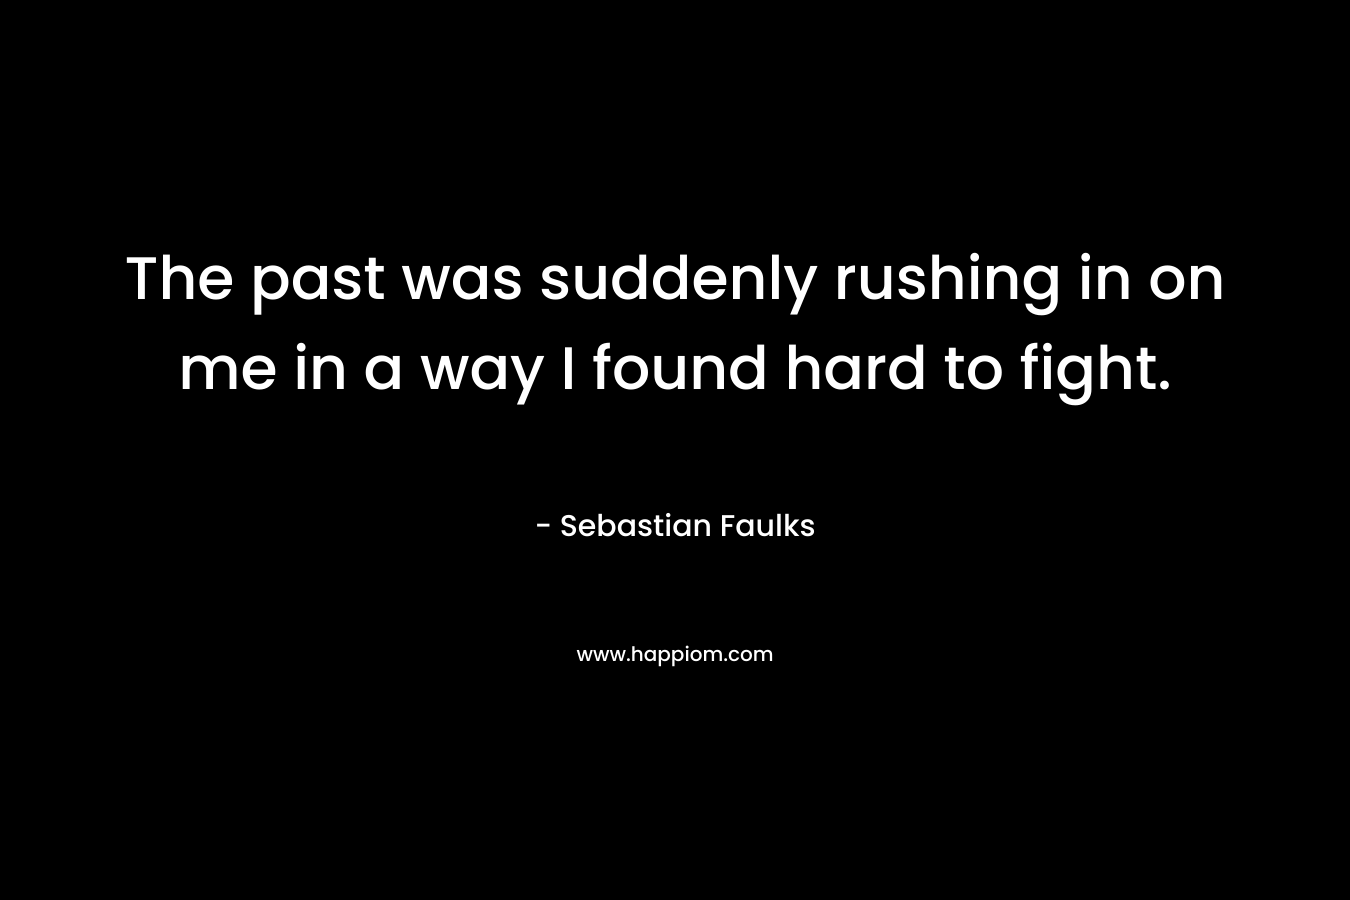 The past was suddenly rushing in on me in a way I found hard to fight. – Sebastian Faulks